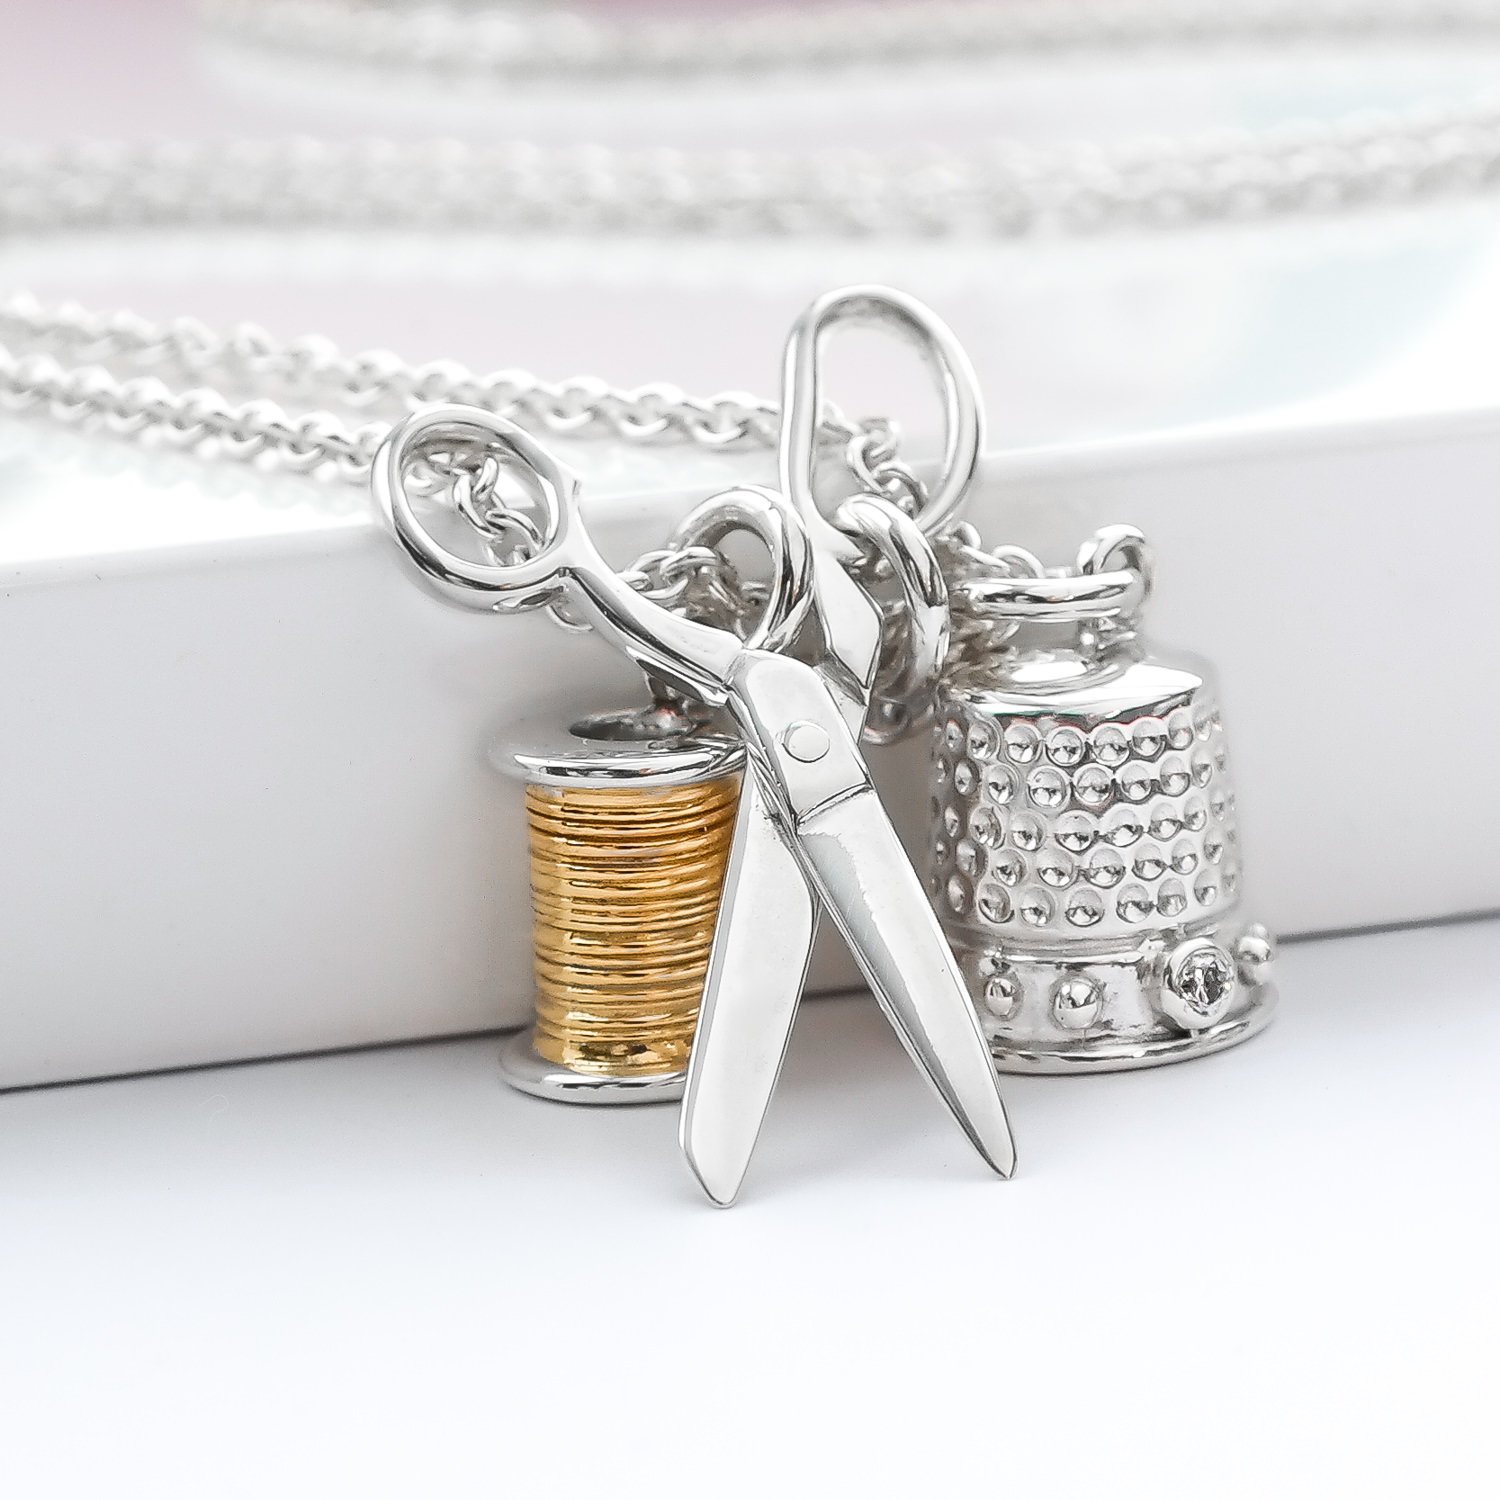 Sterling-silver-tailors-shears-thimble-cotton-reel-necklace-fine-jewellery.JPG